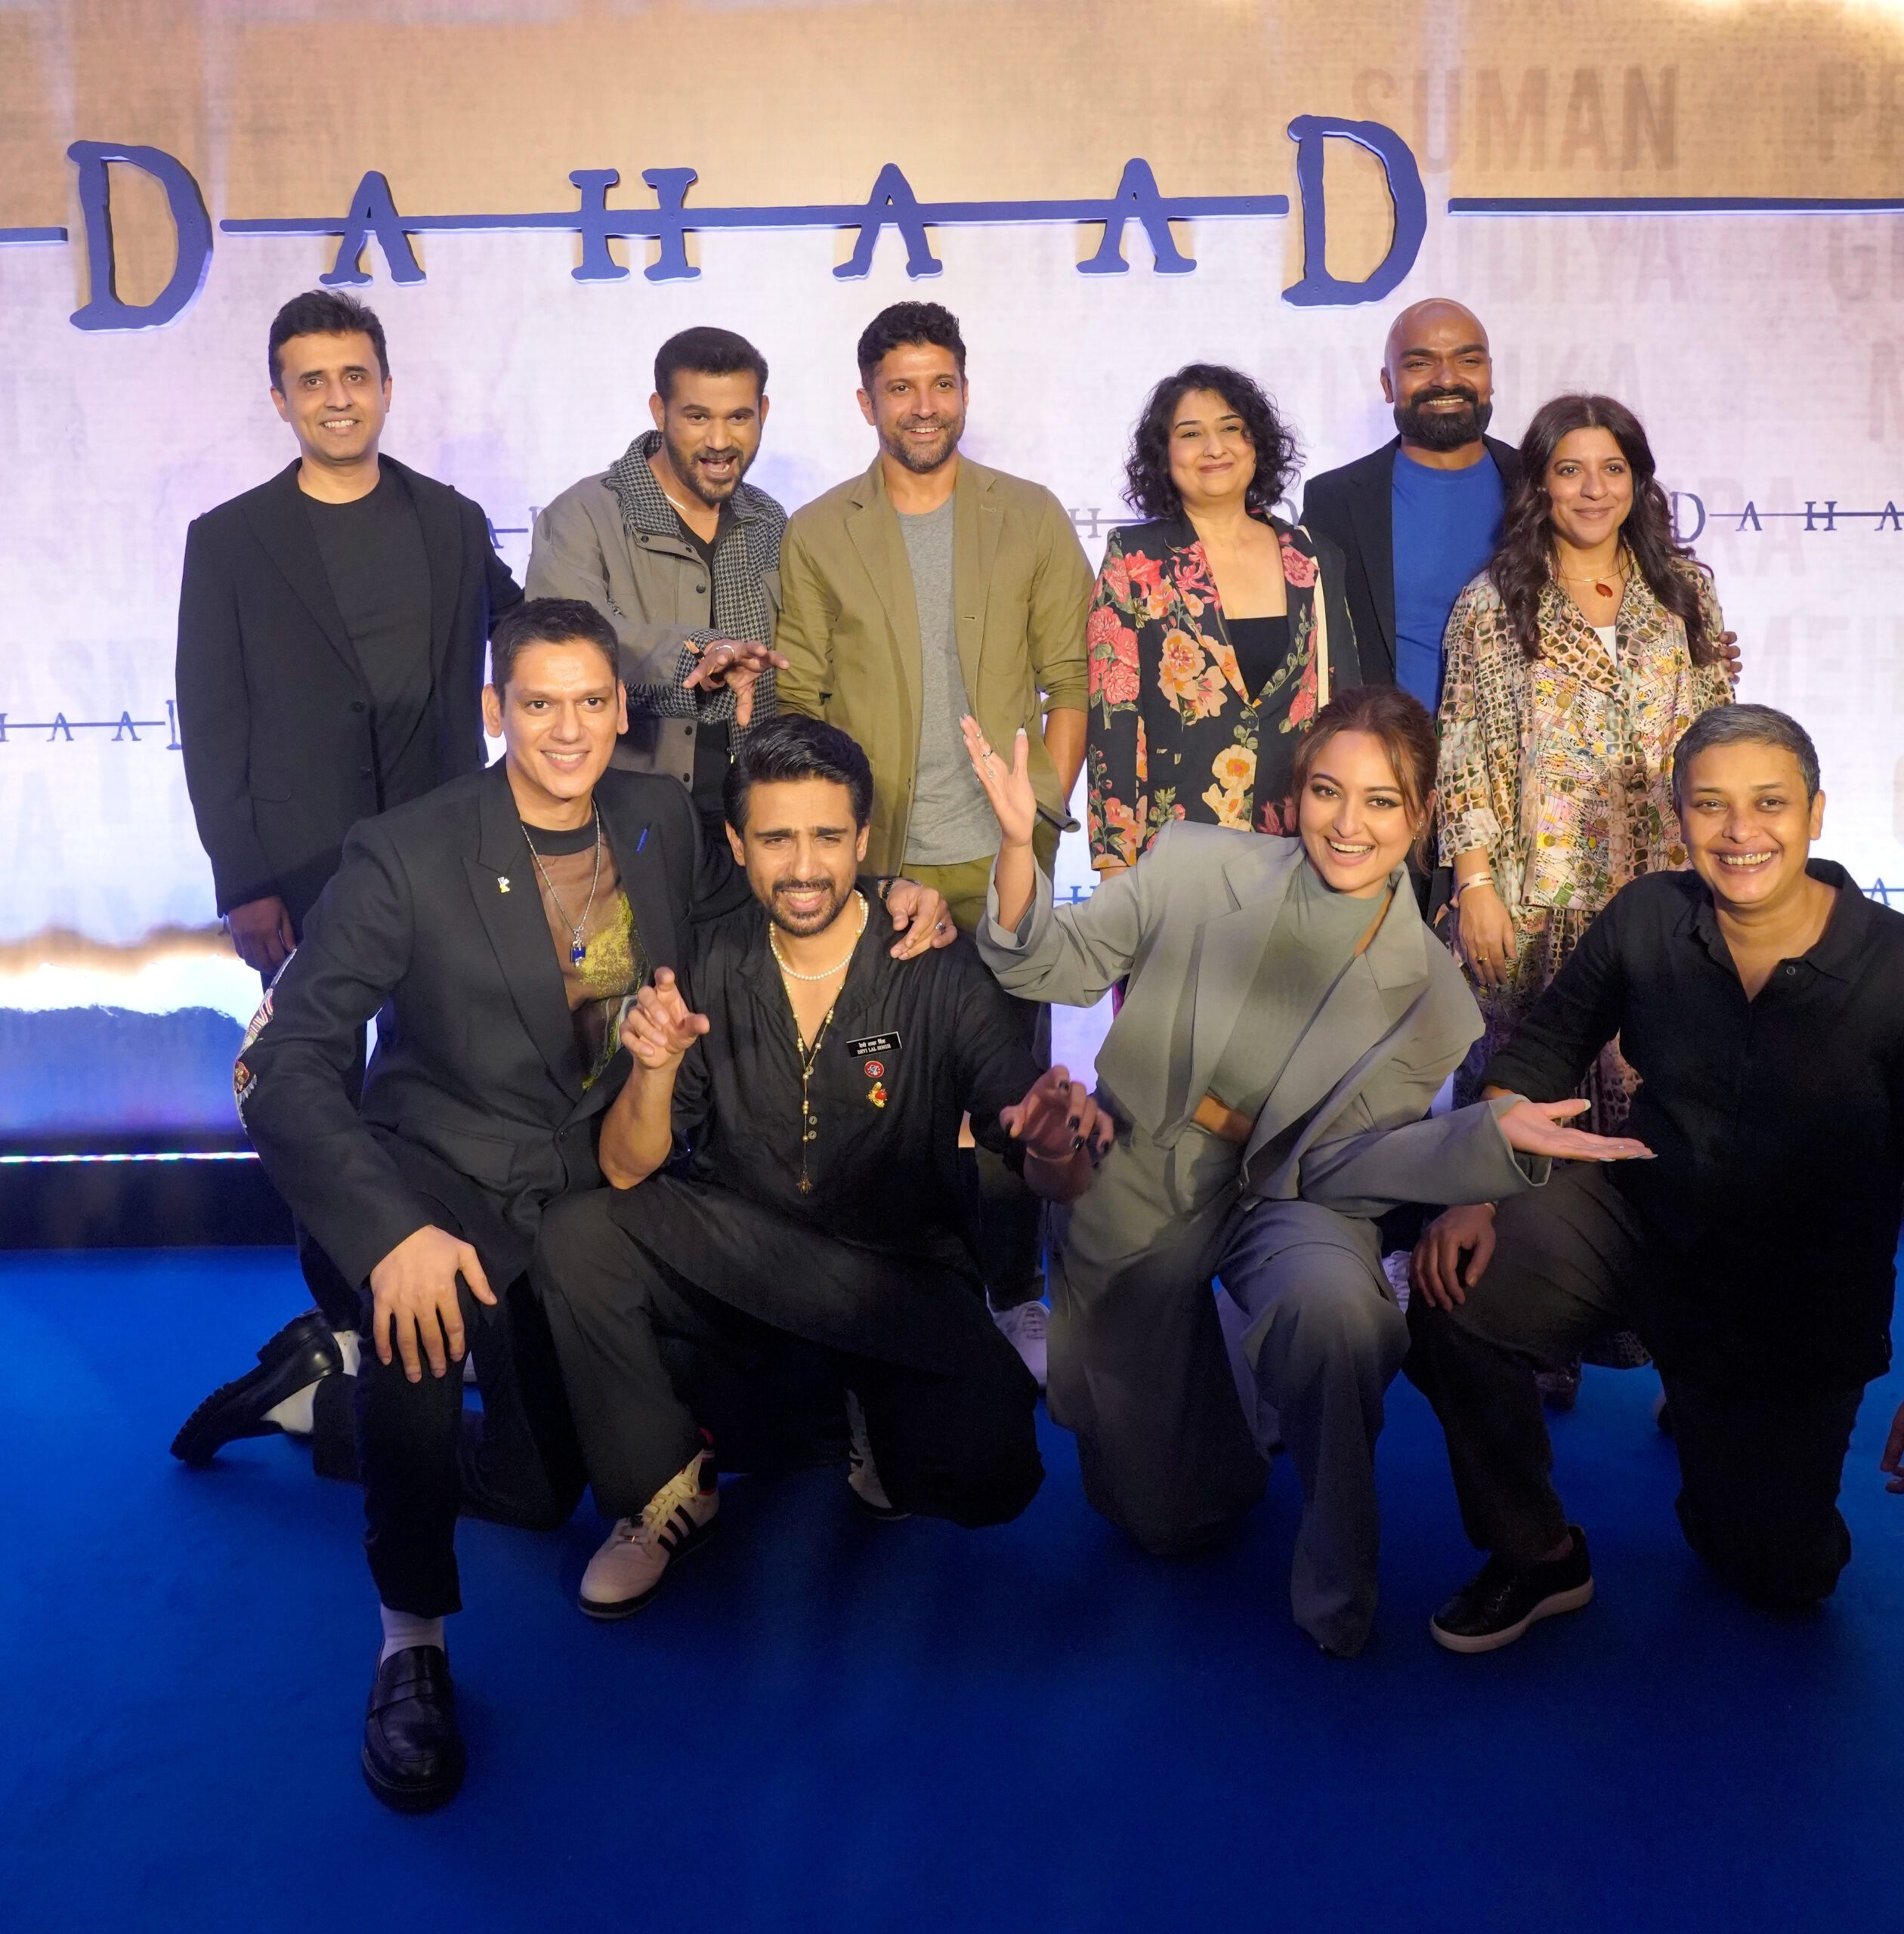 Dahaad web series review: In crime thriller, the real hero is the